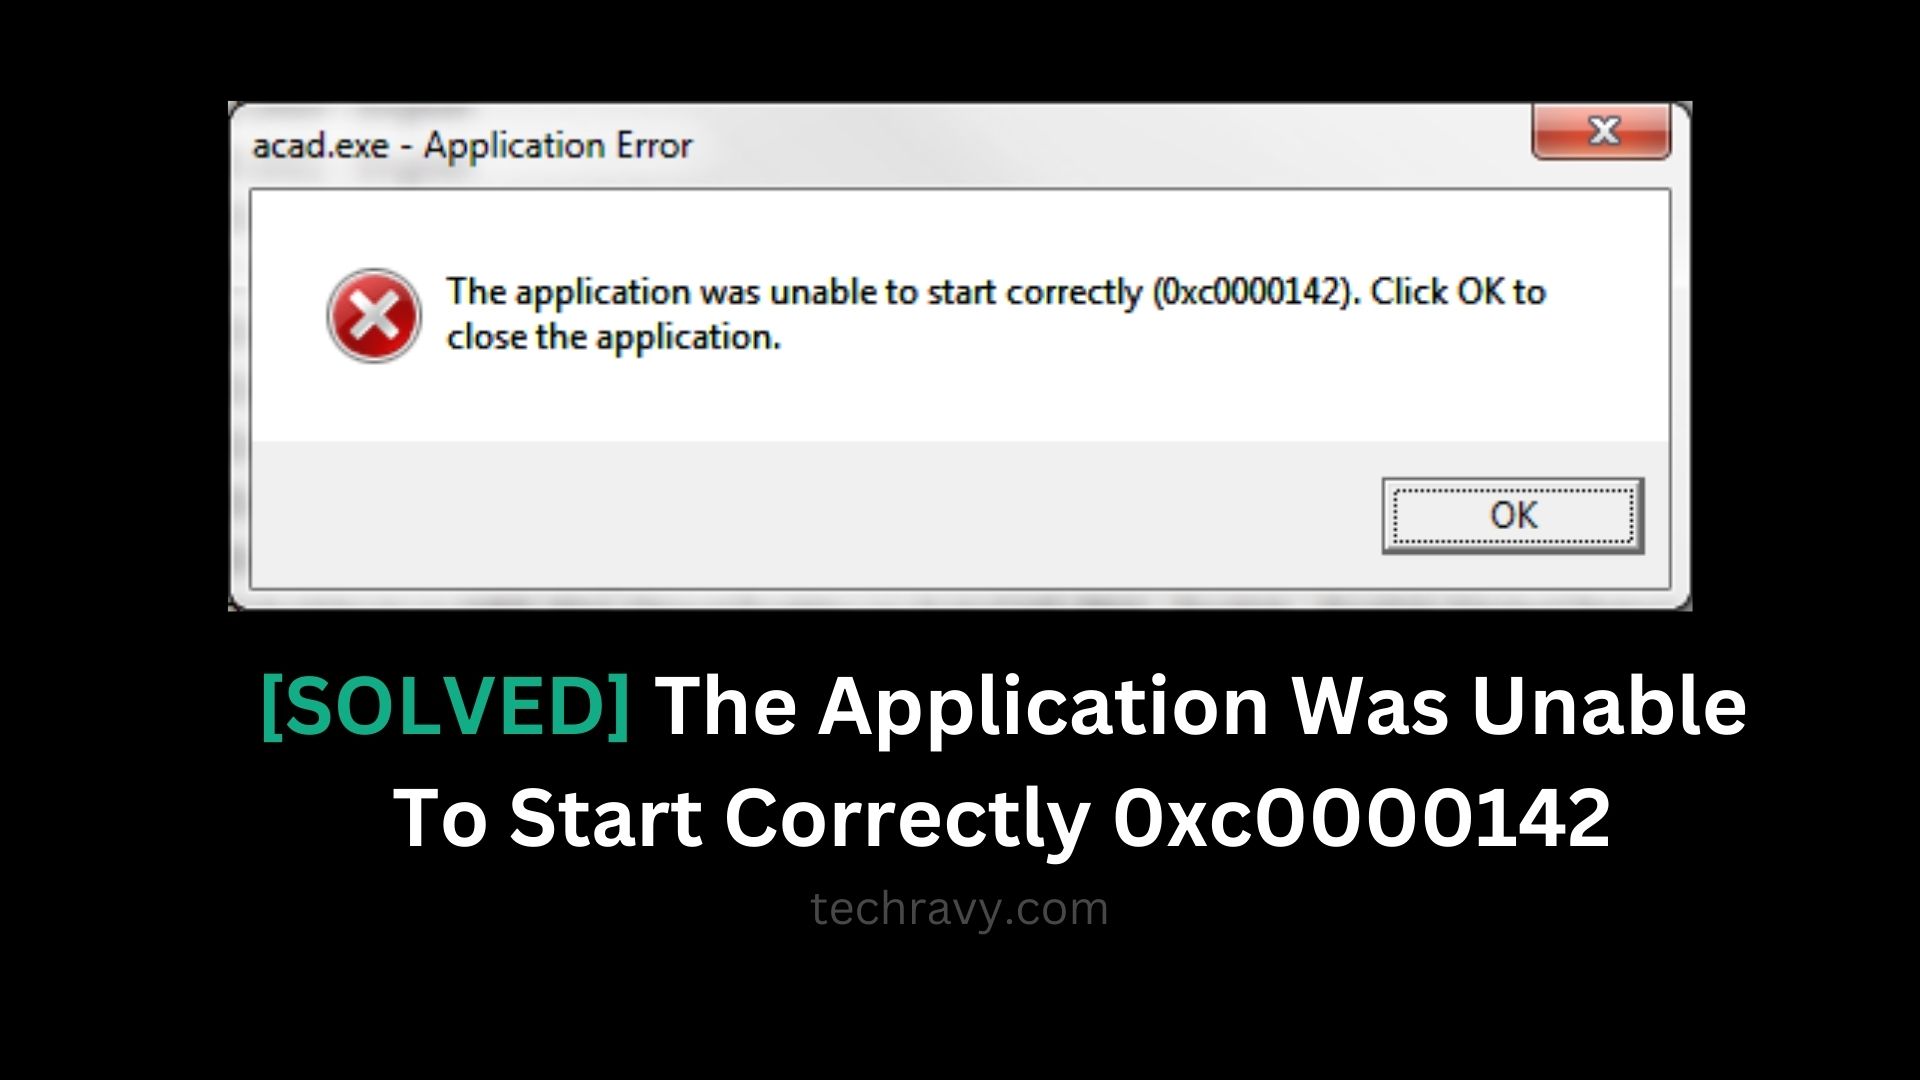 [SOLVED] The Application Was Unable To Start Correctly 0xc0000142